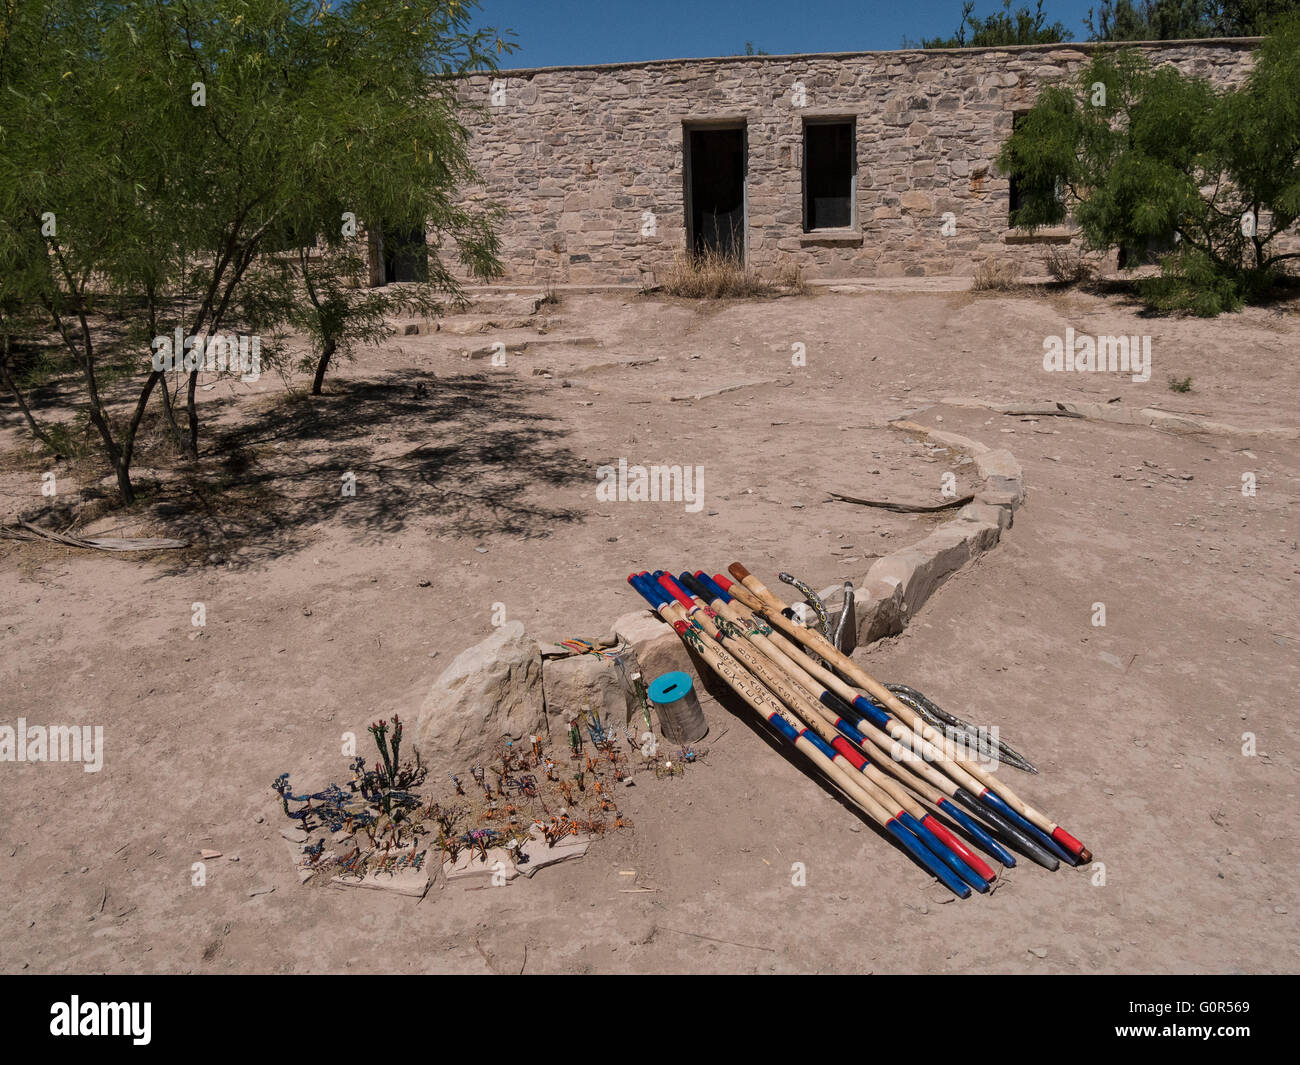 Mexican wares for sale, Boquillas Hot Springs, Big Bend National Park, Texas.Big Bend National Park, Texas. Stock Photo